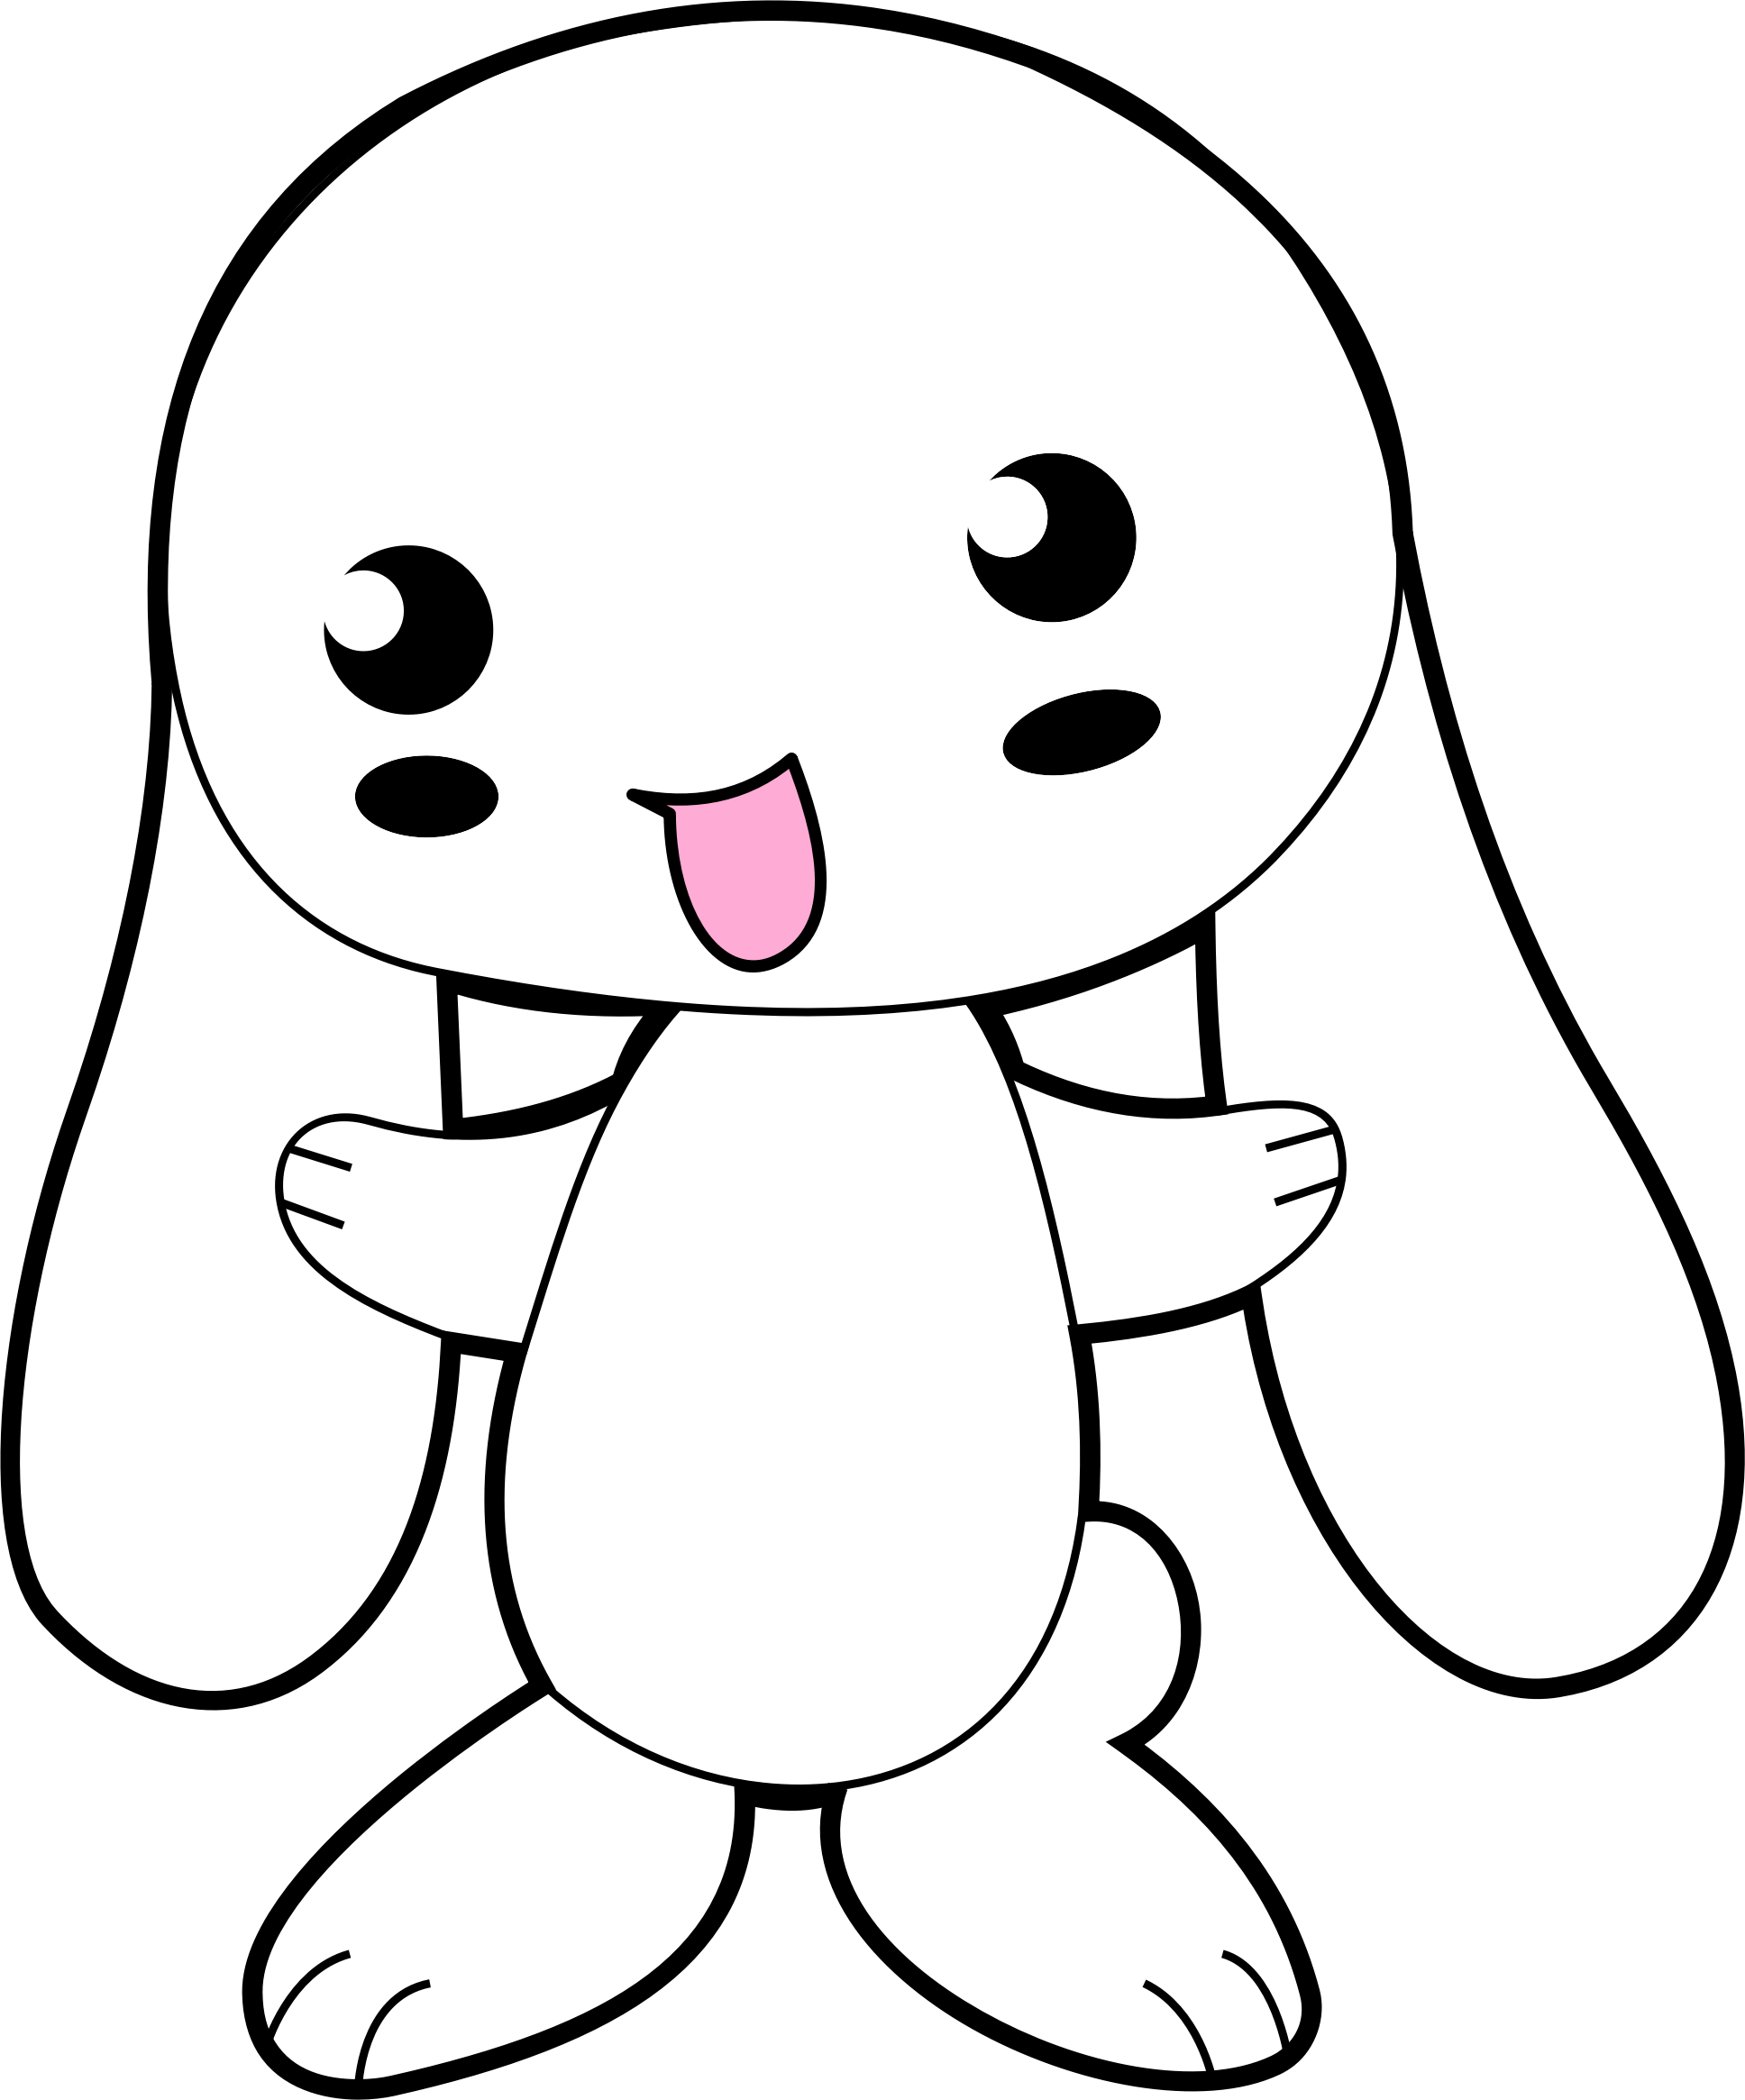 Cute Bunny Cartoon Black And White, Hd Png Download